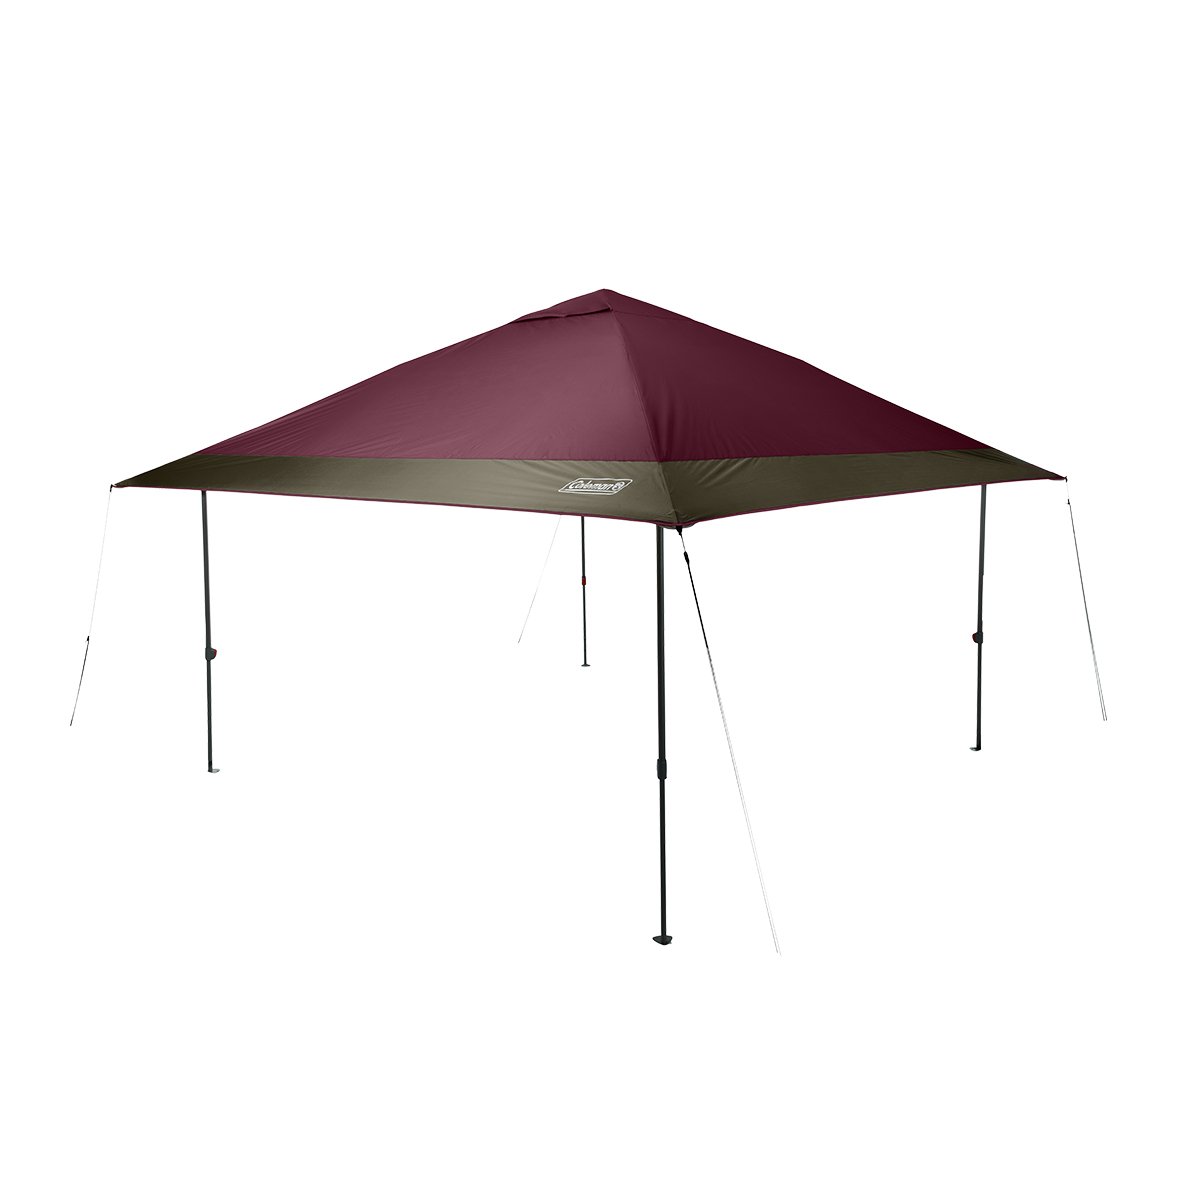 OASIS™ 10 x 10 Canopy | Coleman